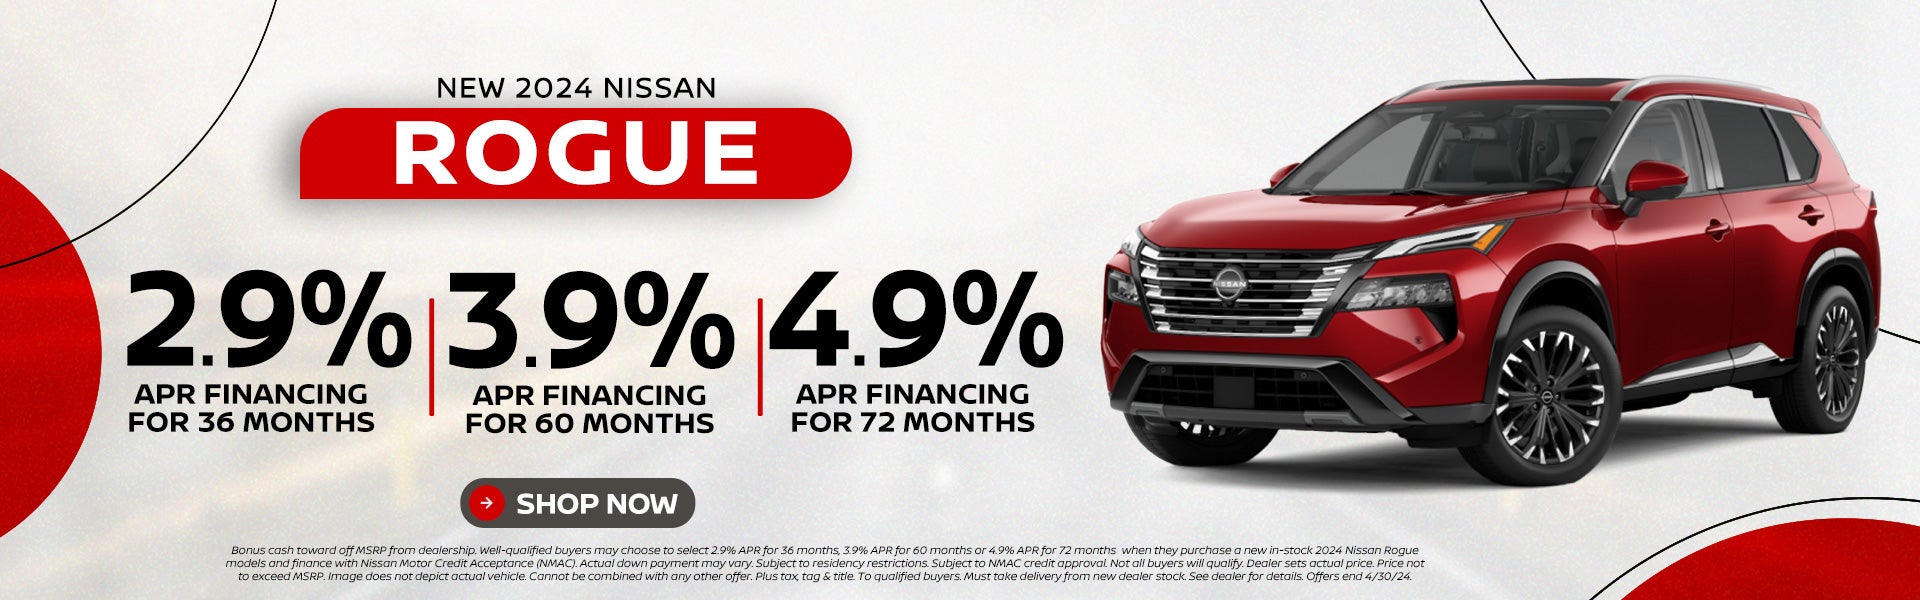 24' Rogue 2.9% APR for 36 months | 3.9% APR for 60 months 